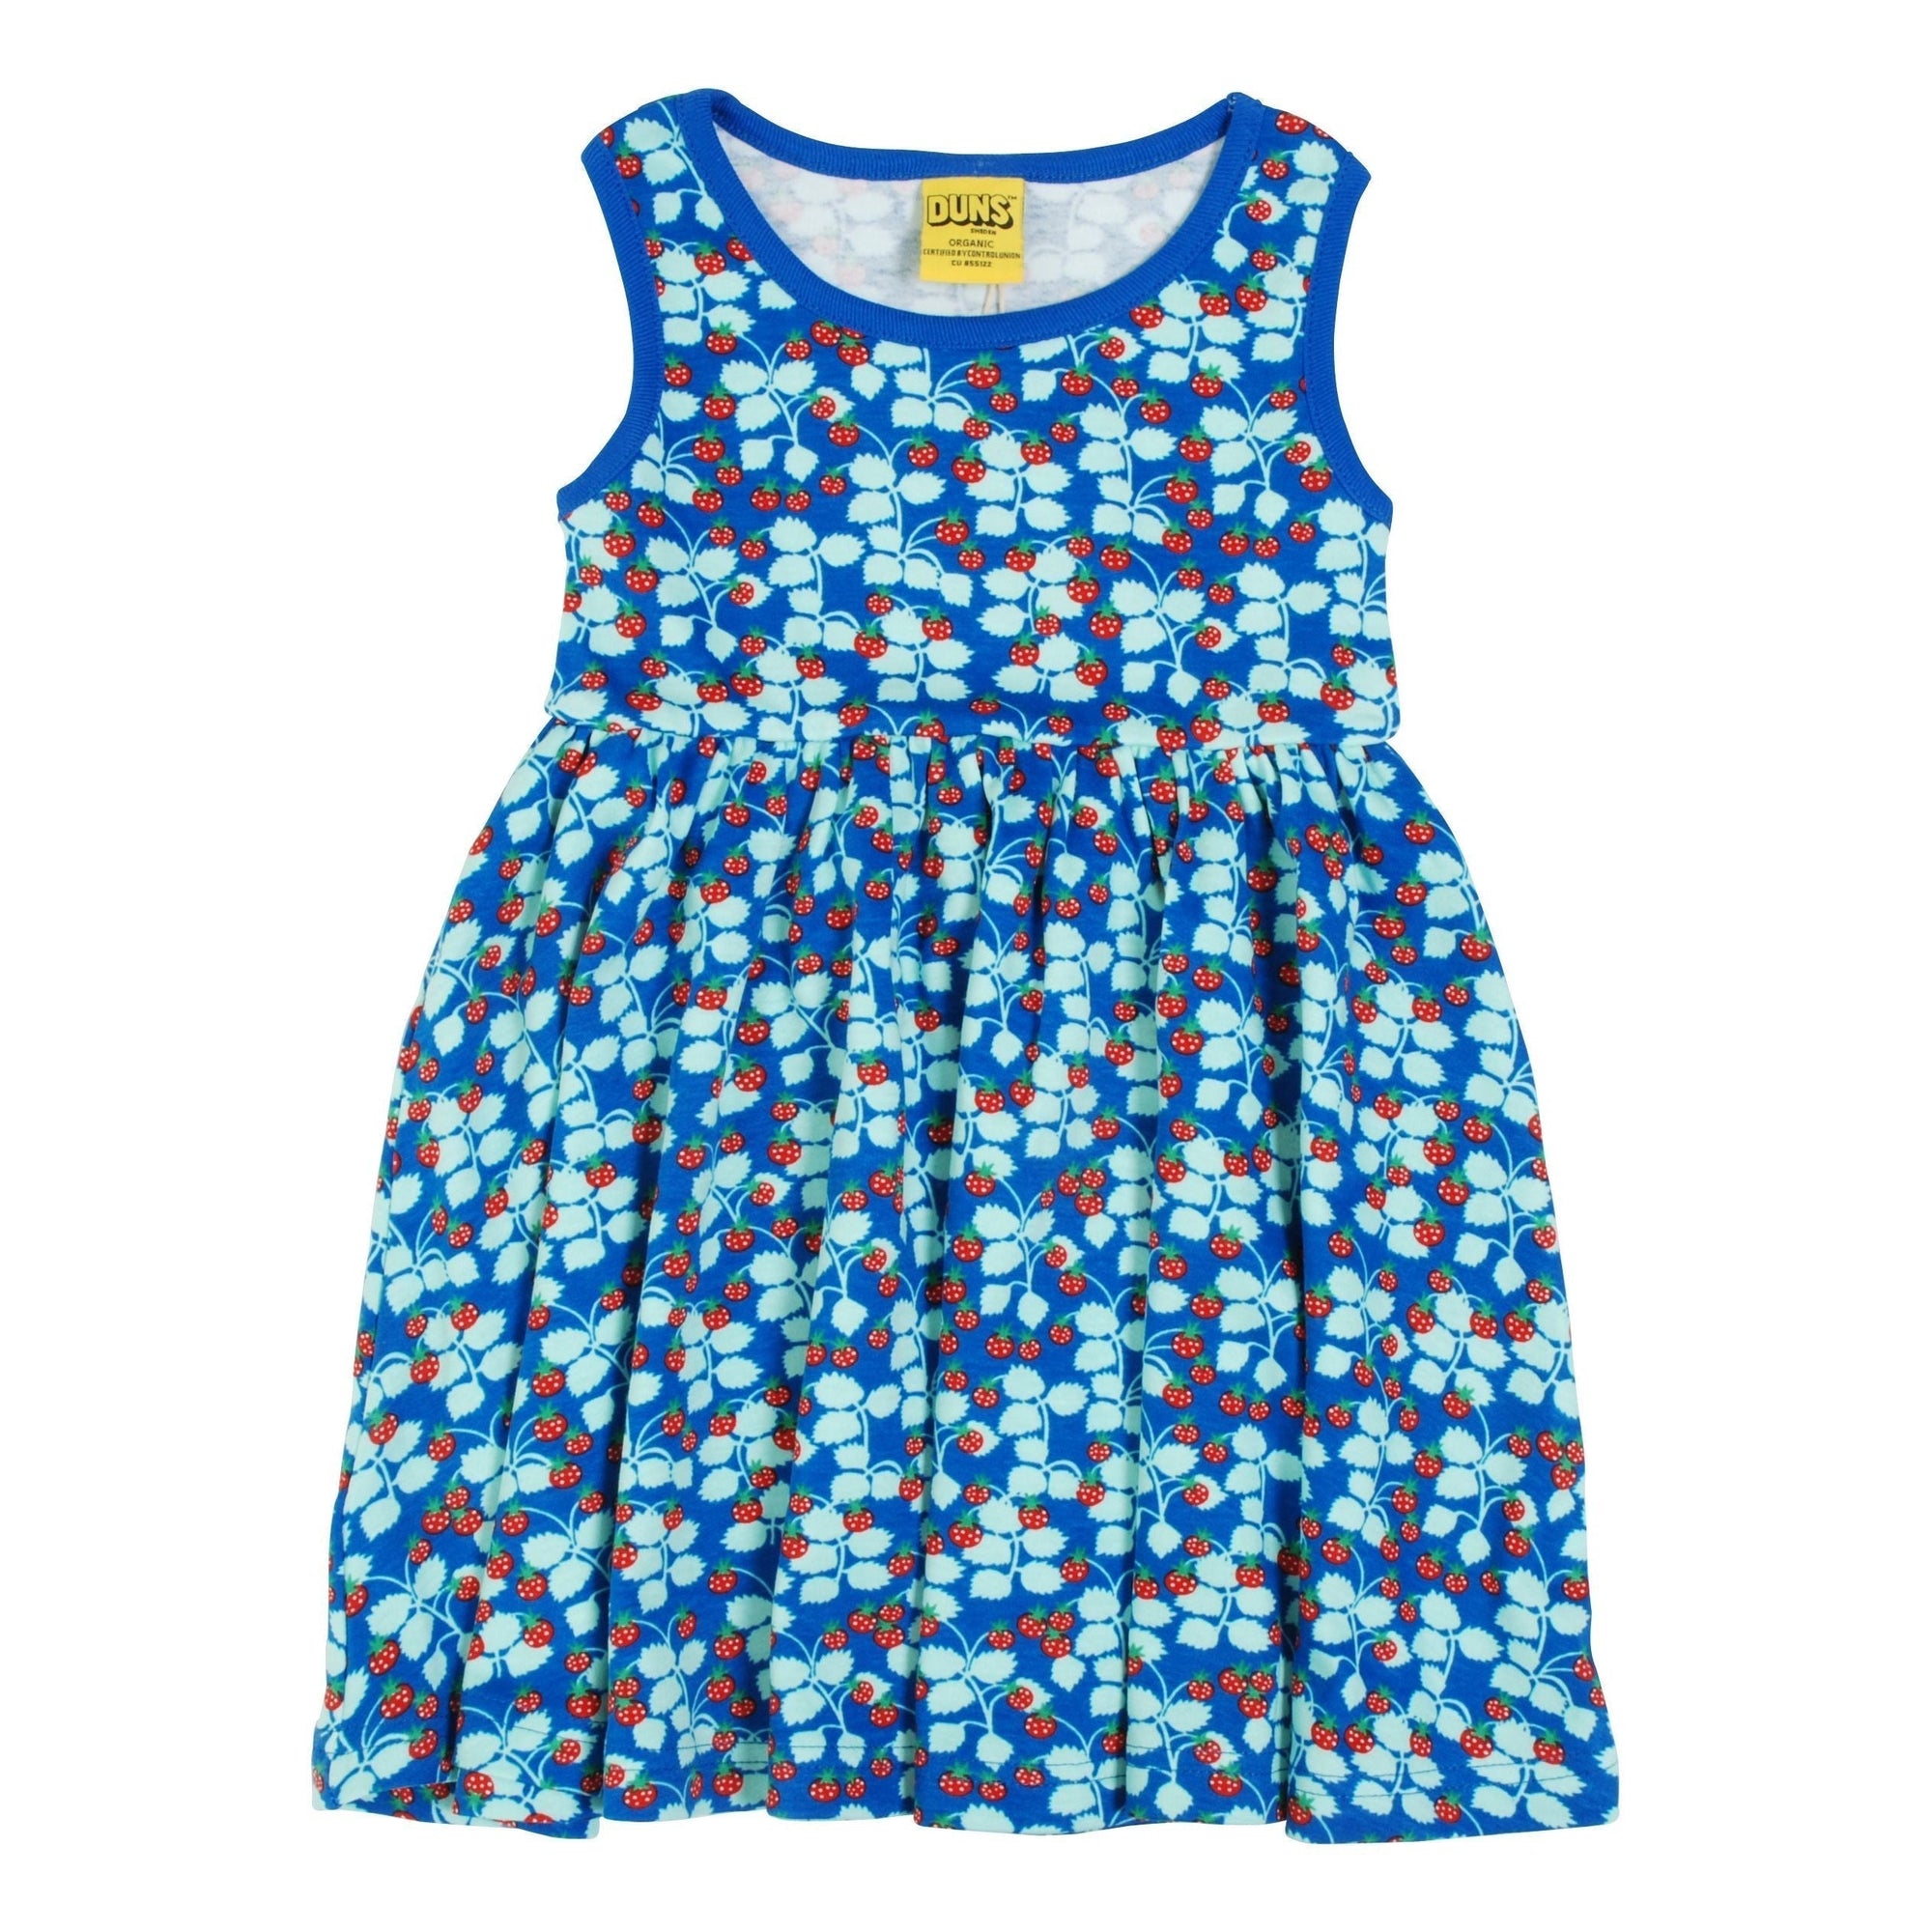 Strawberry - Blue Sleeveless Dress With Gathered Skirt - 1 Left Size 9-10 years-Duns Sweden-Modern Rascals